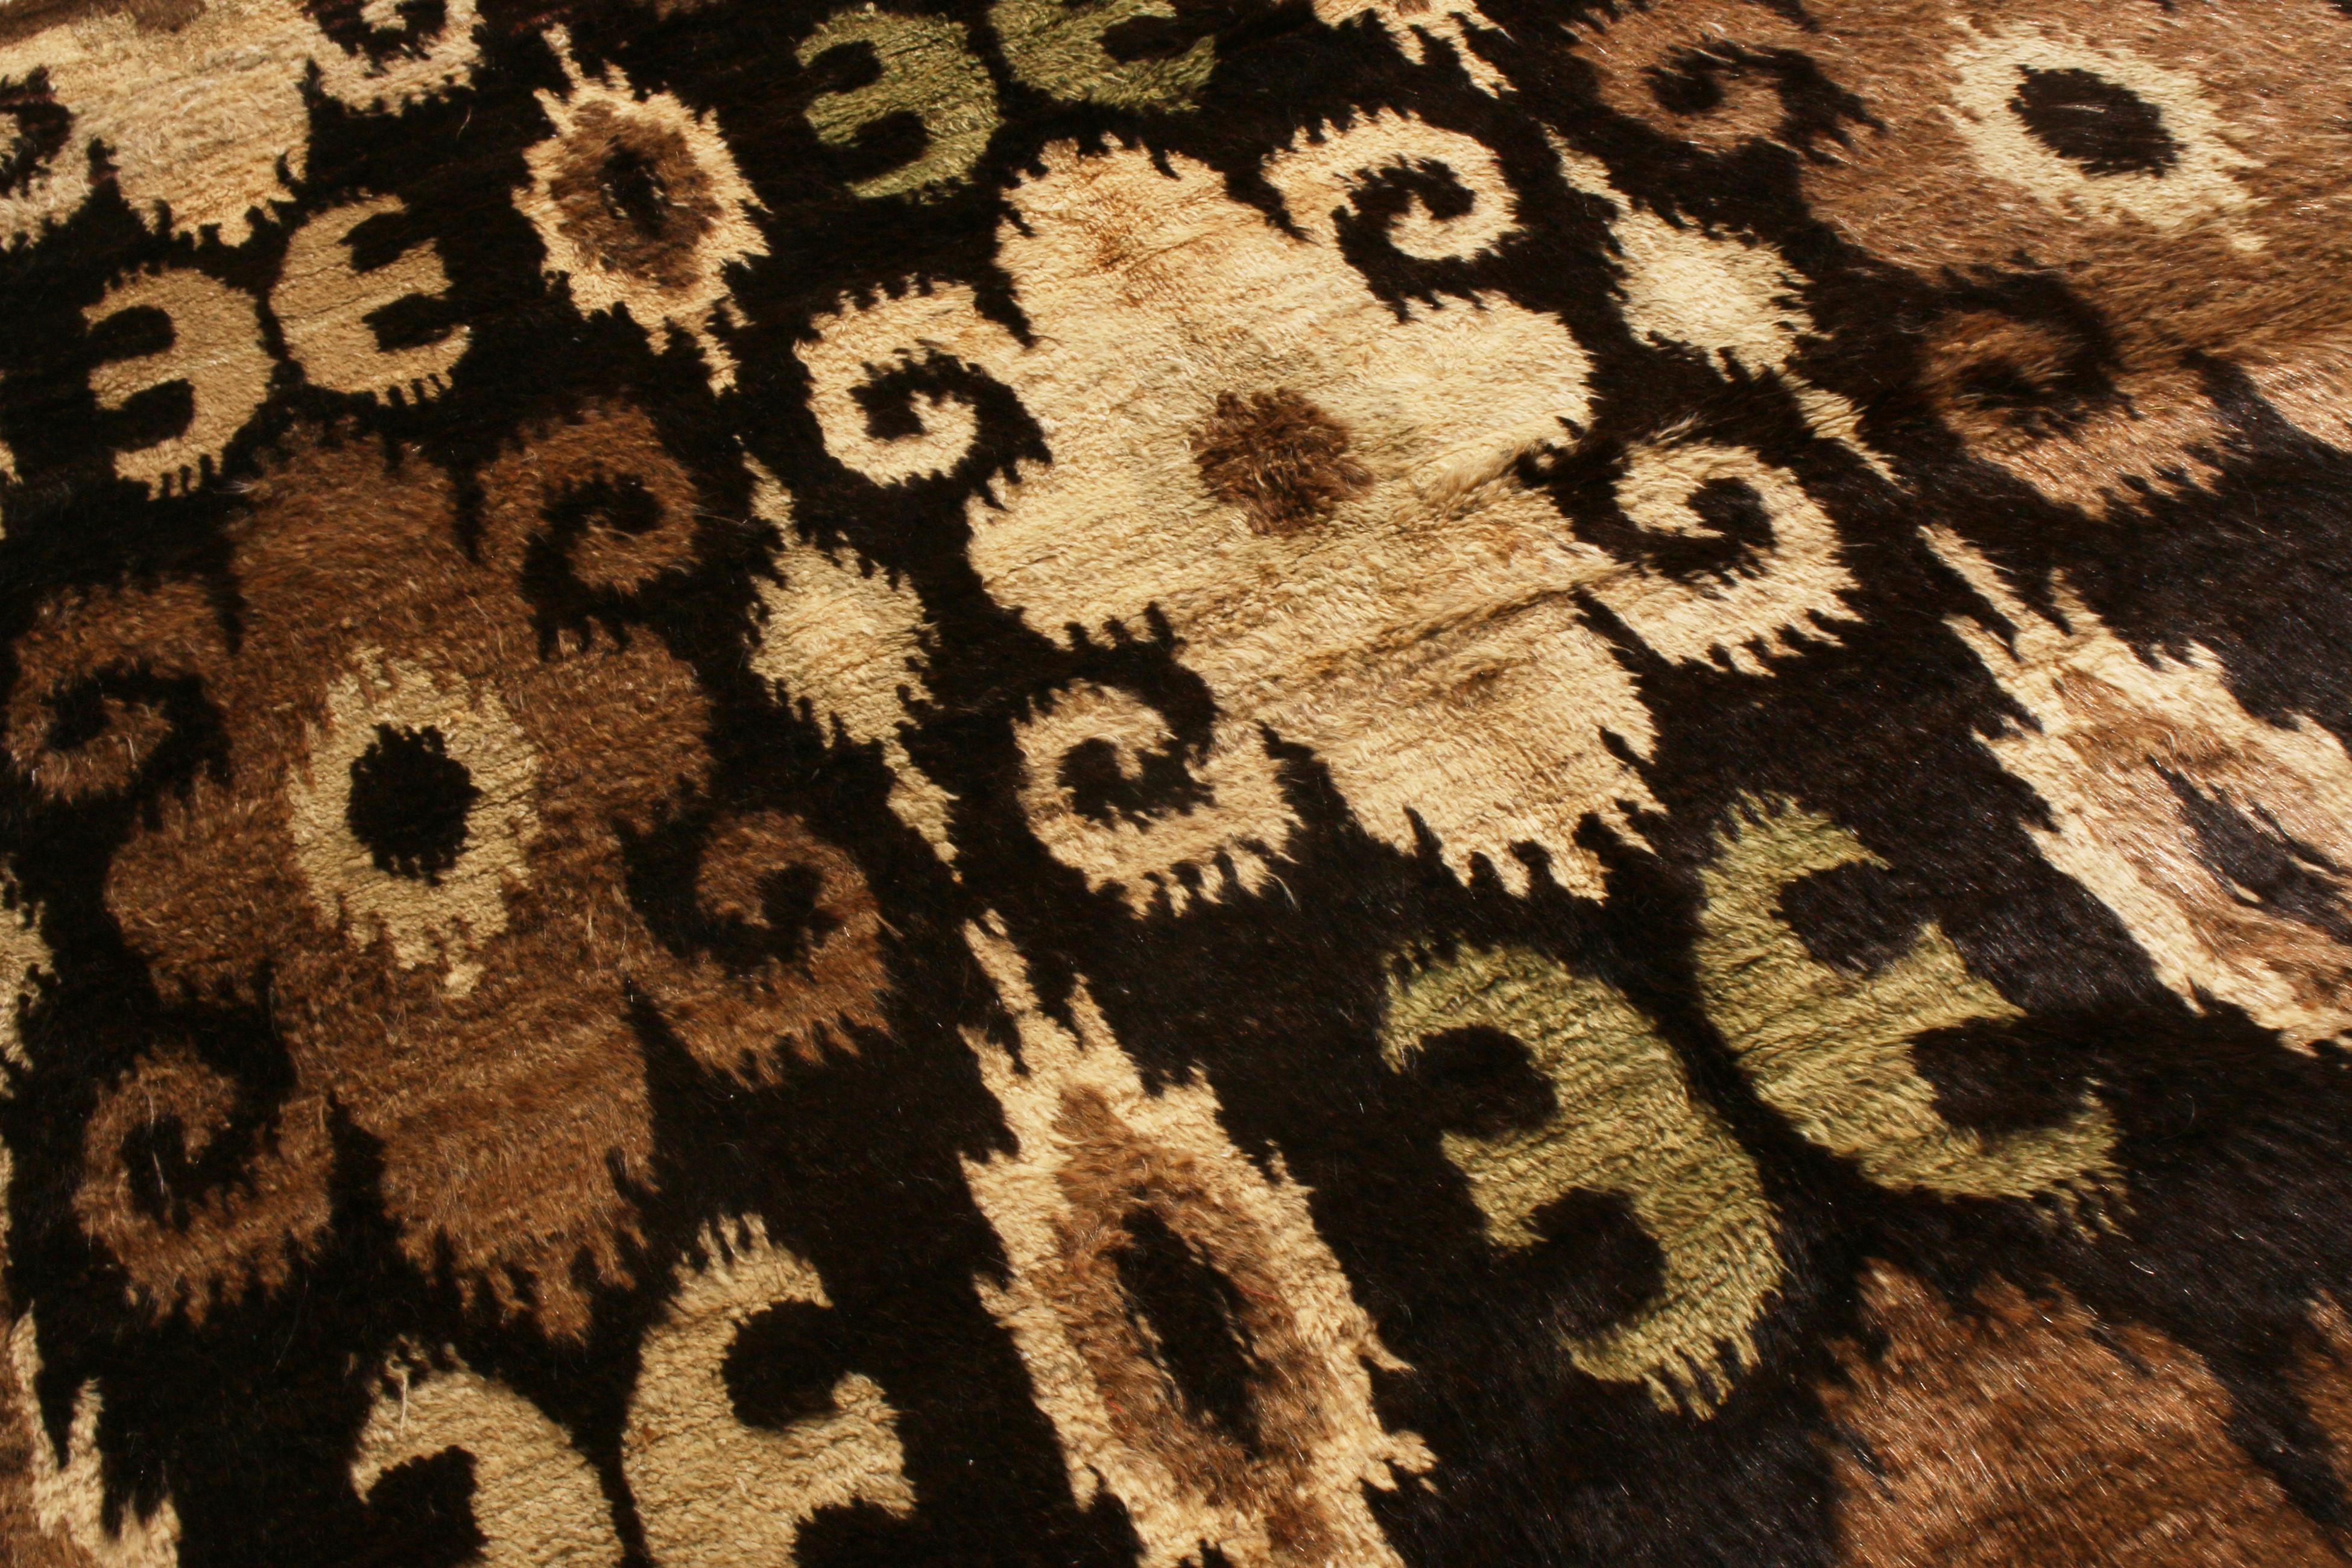 Originating from Afghanistan, this new Aghan wool rug is hand knotted in thick, high quality wool pile with a smoothness like that of goat hair. A deep black background within a rich brown wrapping guard border is complemented by beige, chestnut